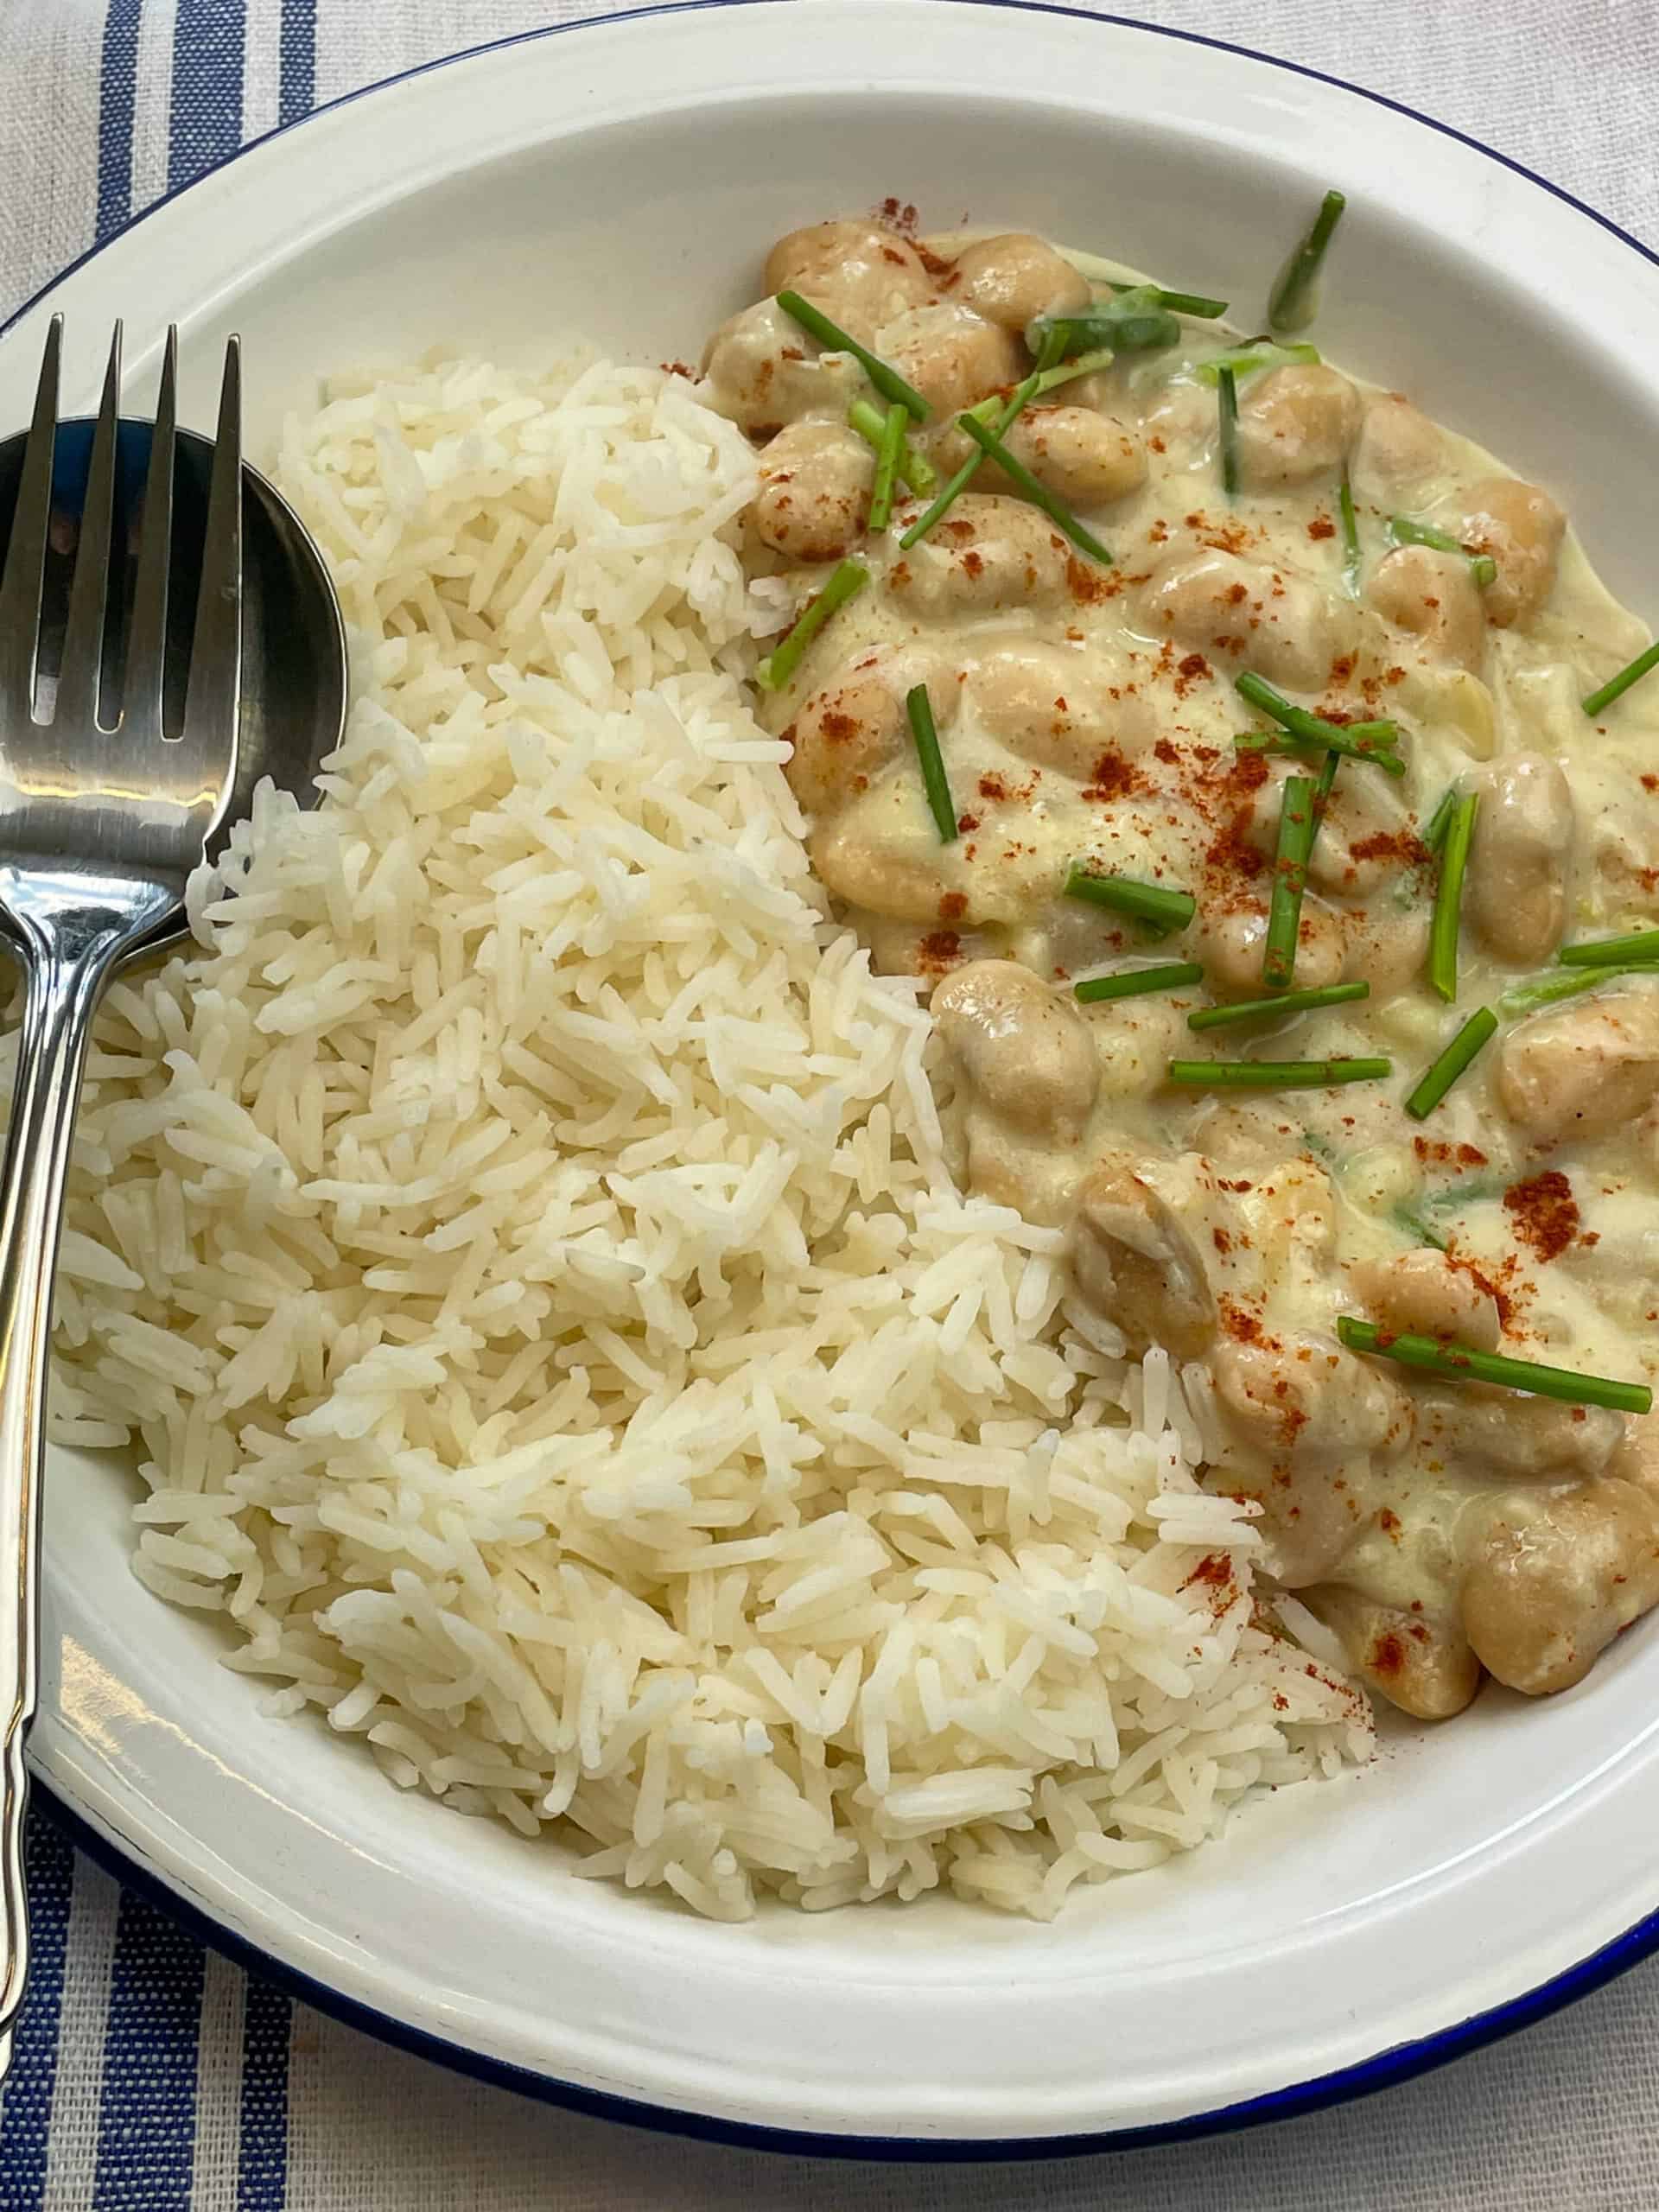 Butter bean 'chicken' supreme served with rice, spoon and fork at the side and blue striped tea towel, featured image.